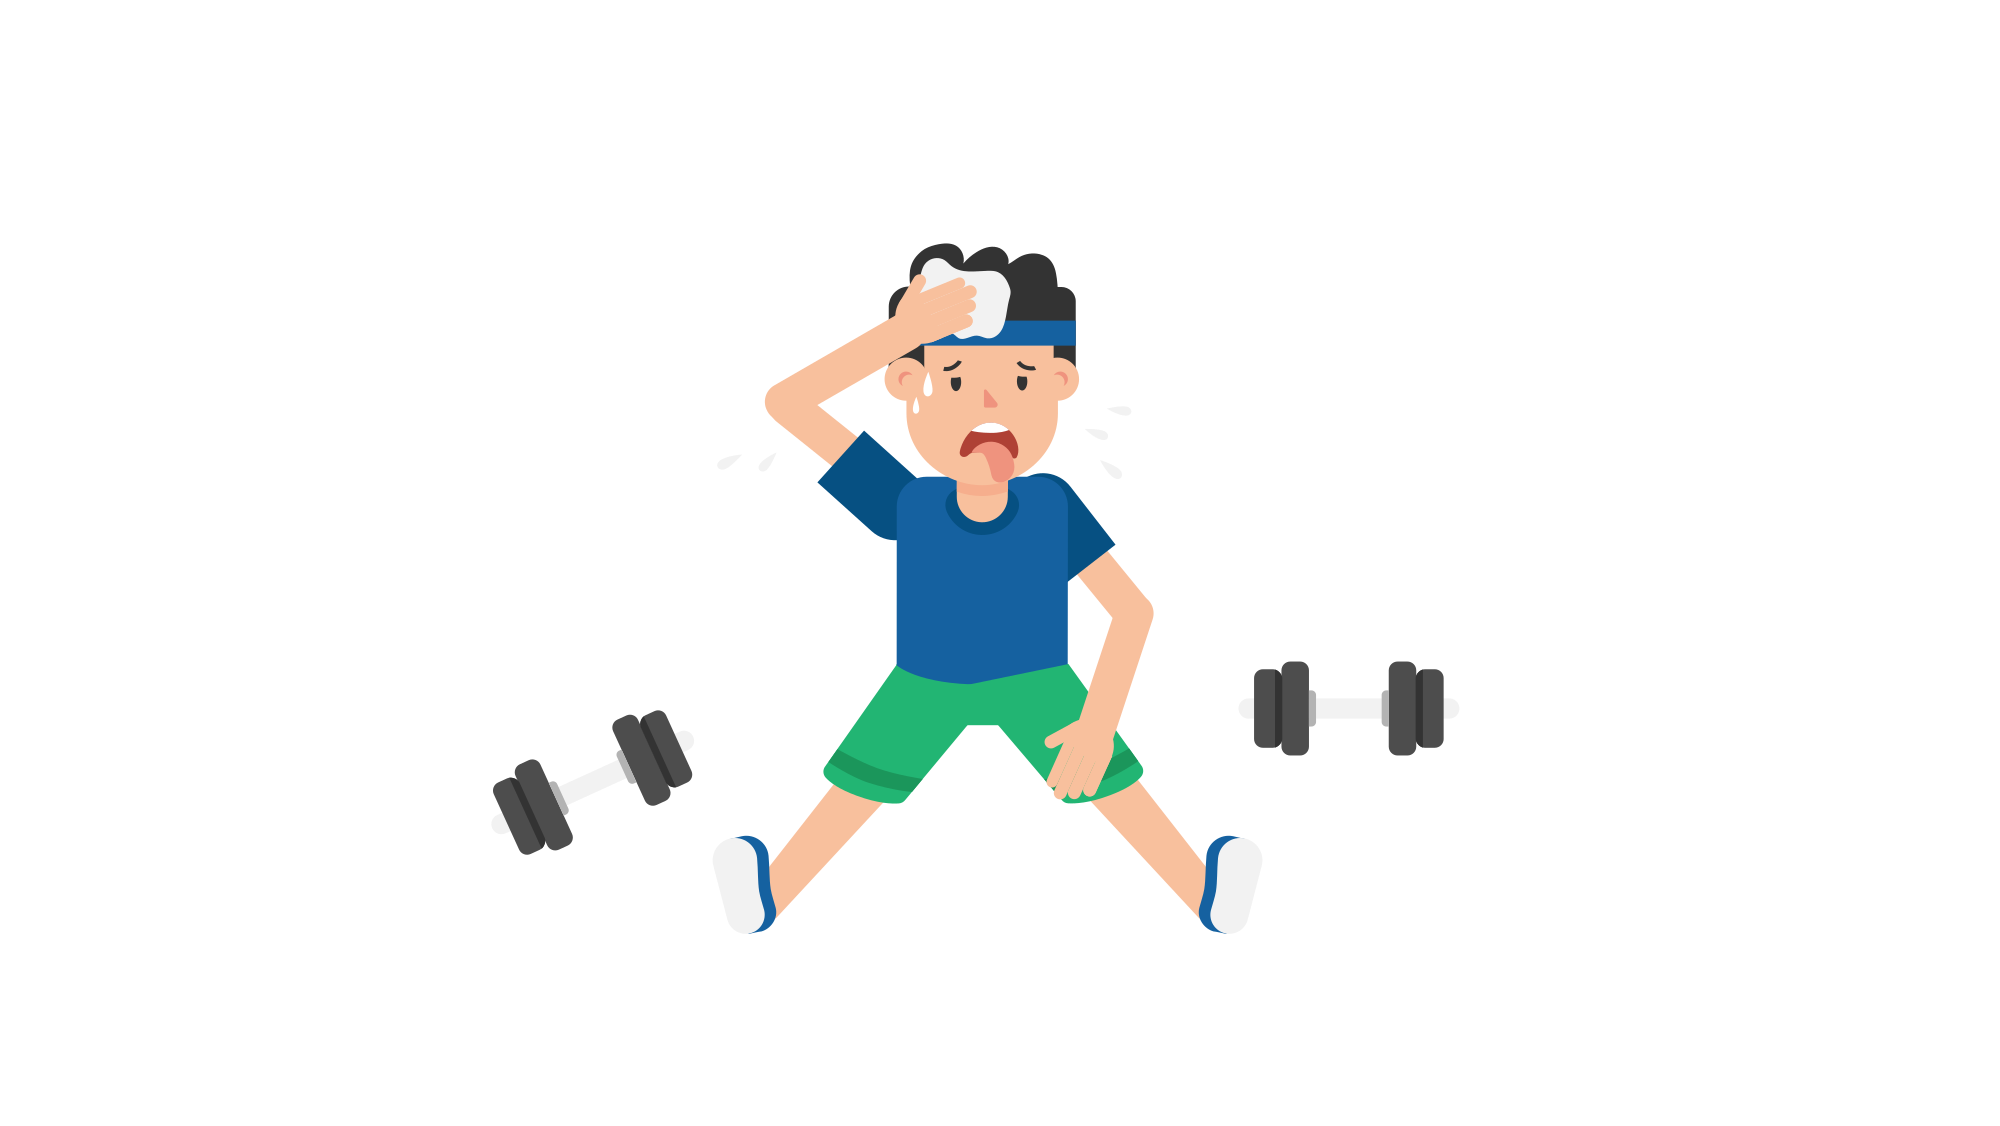 Exercising clipart physical education. File man tired after